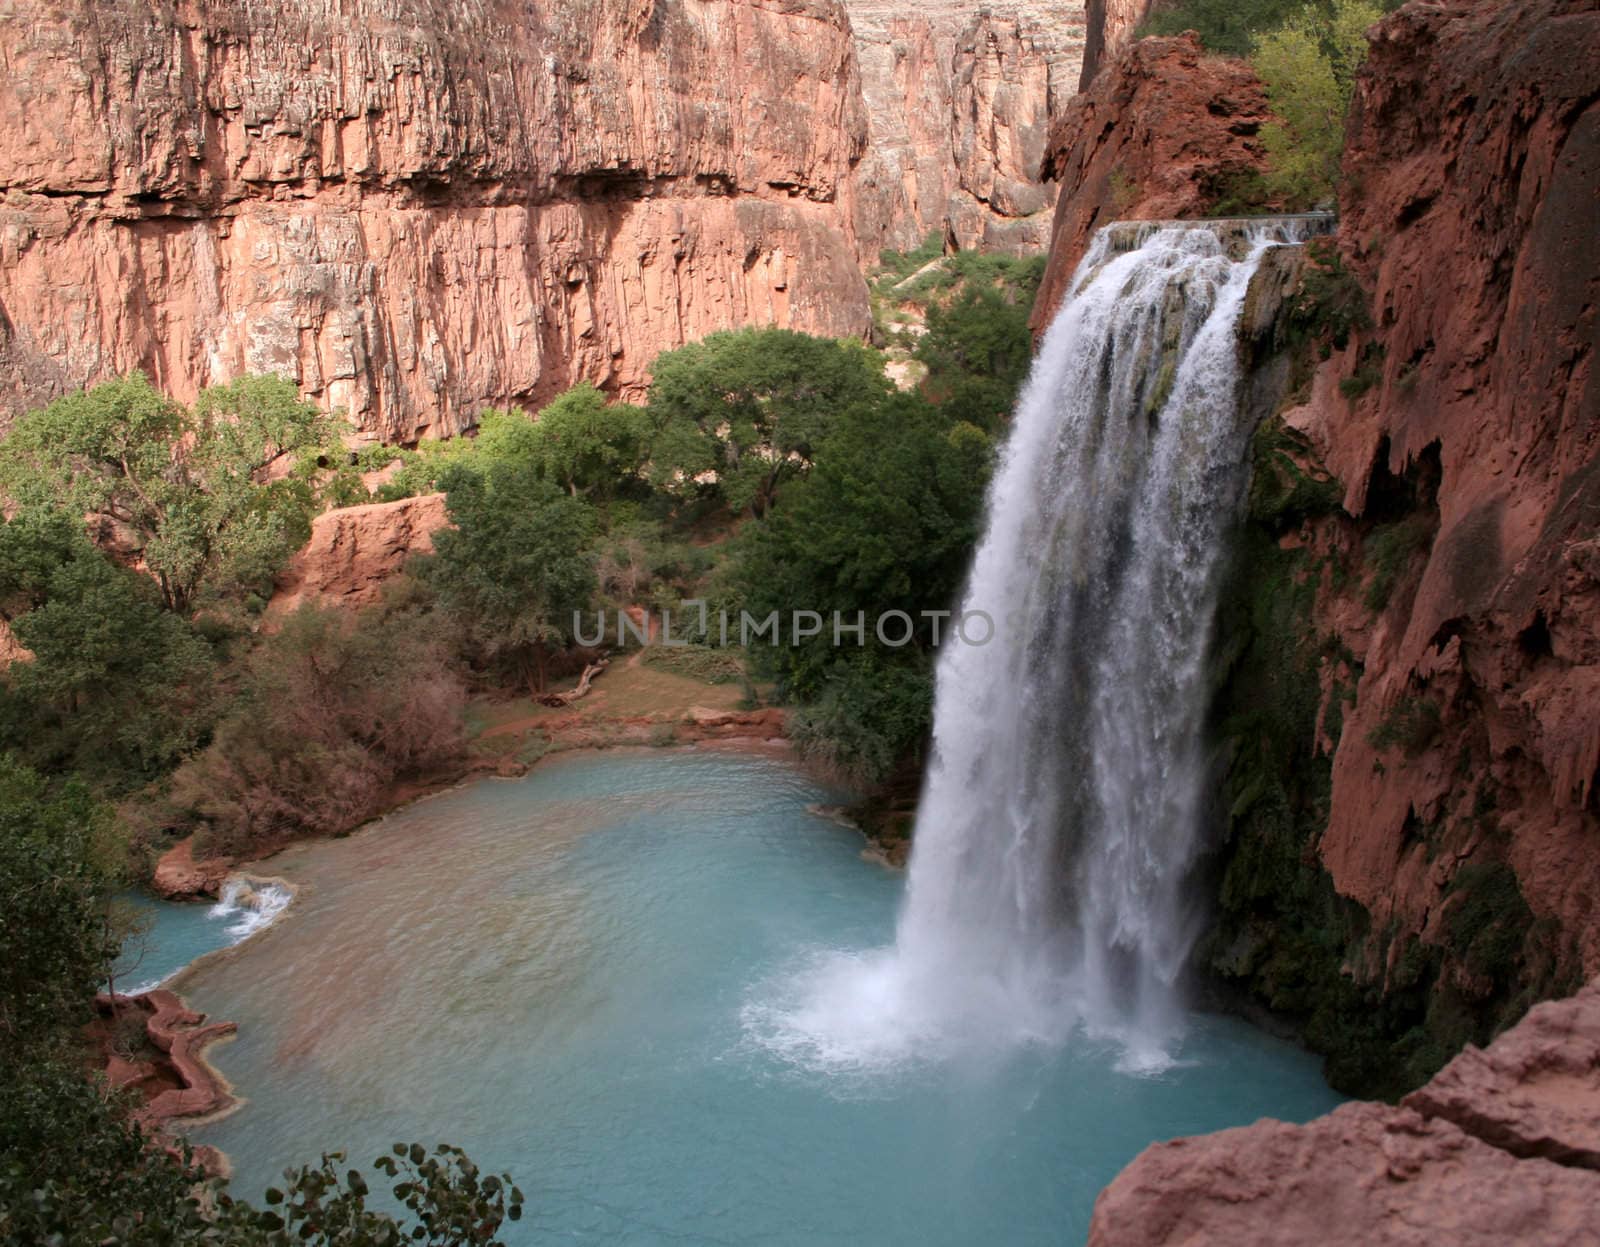 A sideview of the havasu waterfall within the grand canyon.
